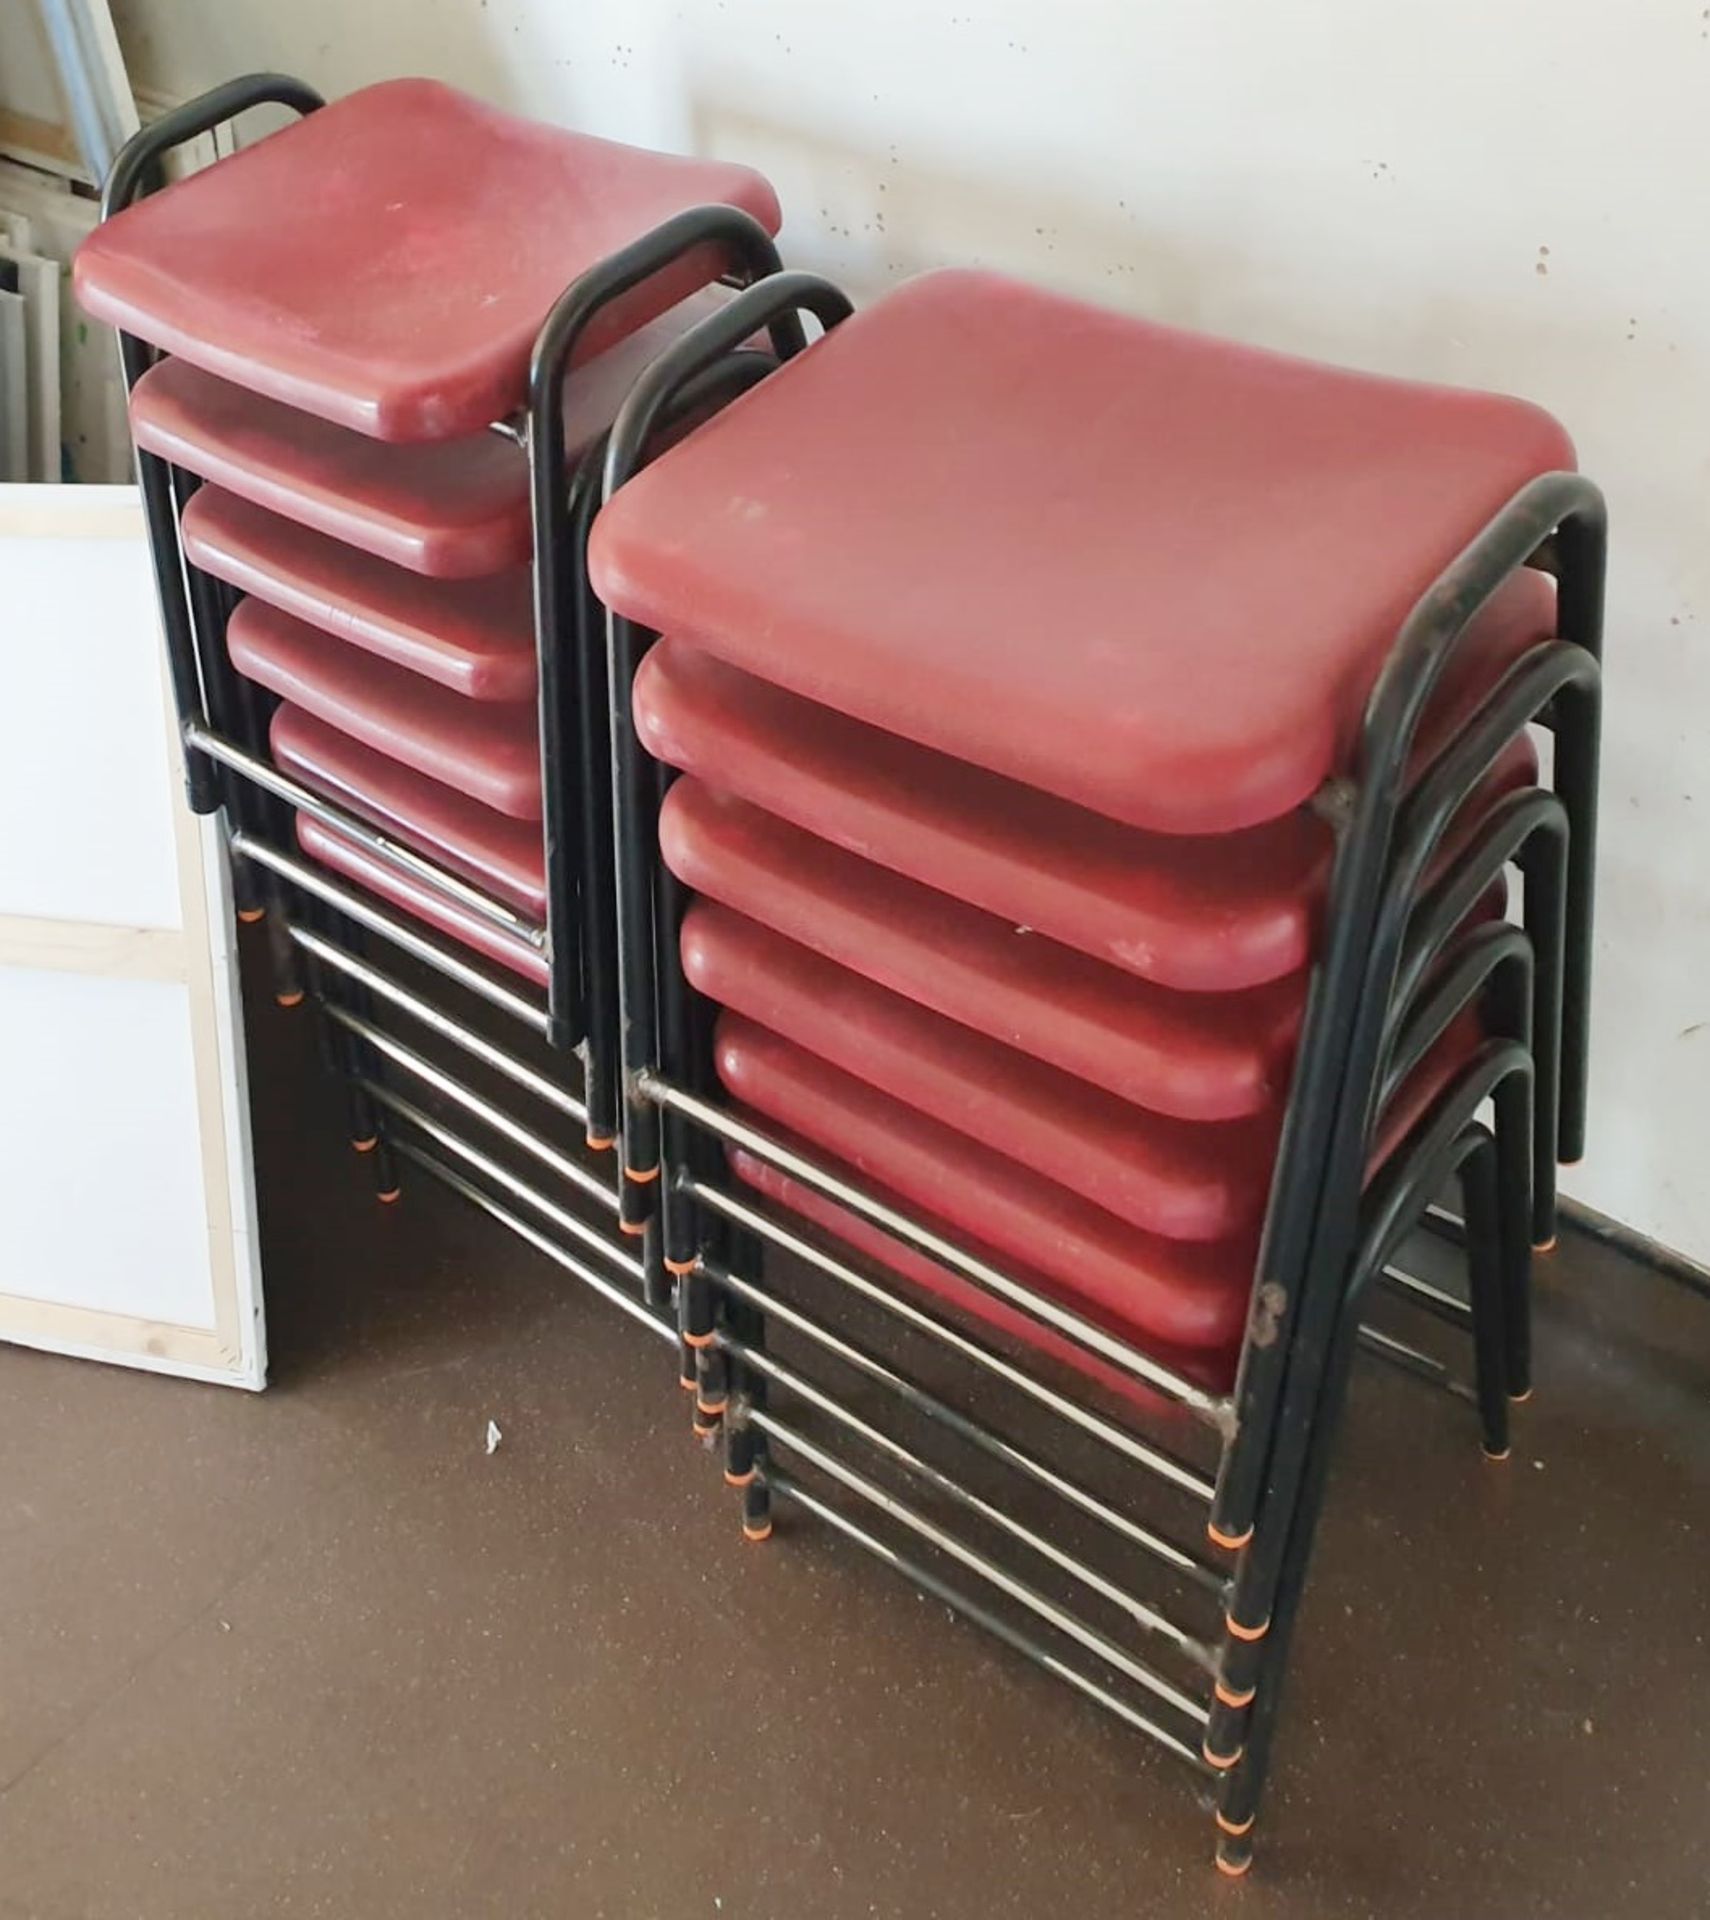 Approx 50 x Red Stackable Seating Stools - Black Metal Frames With Red Seating Pads - CL499 -